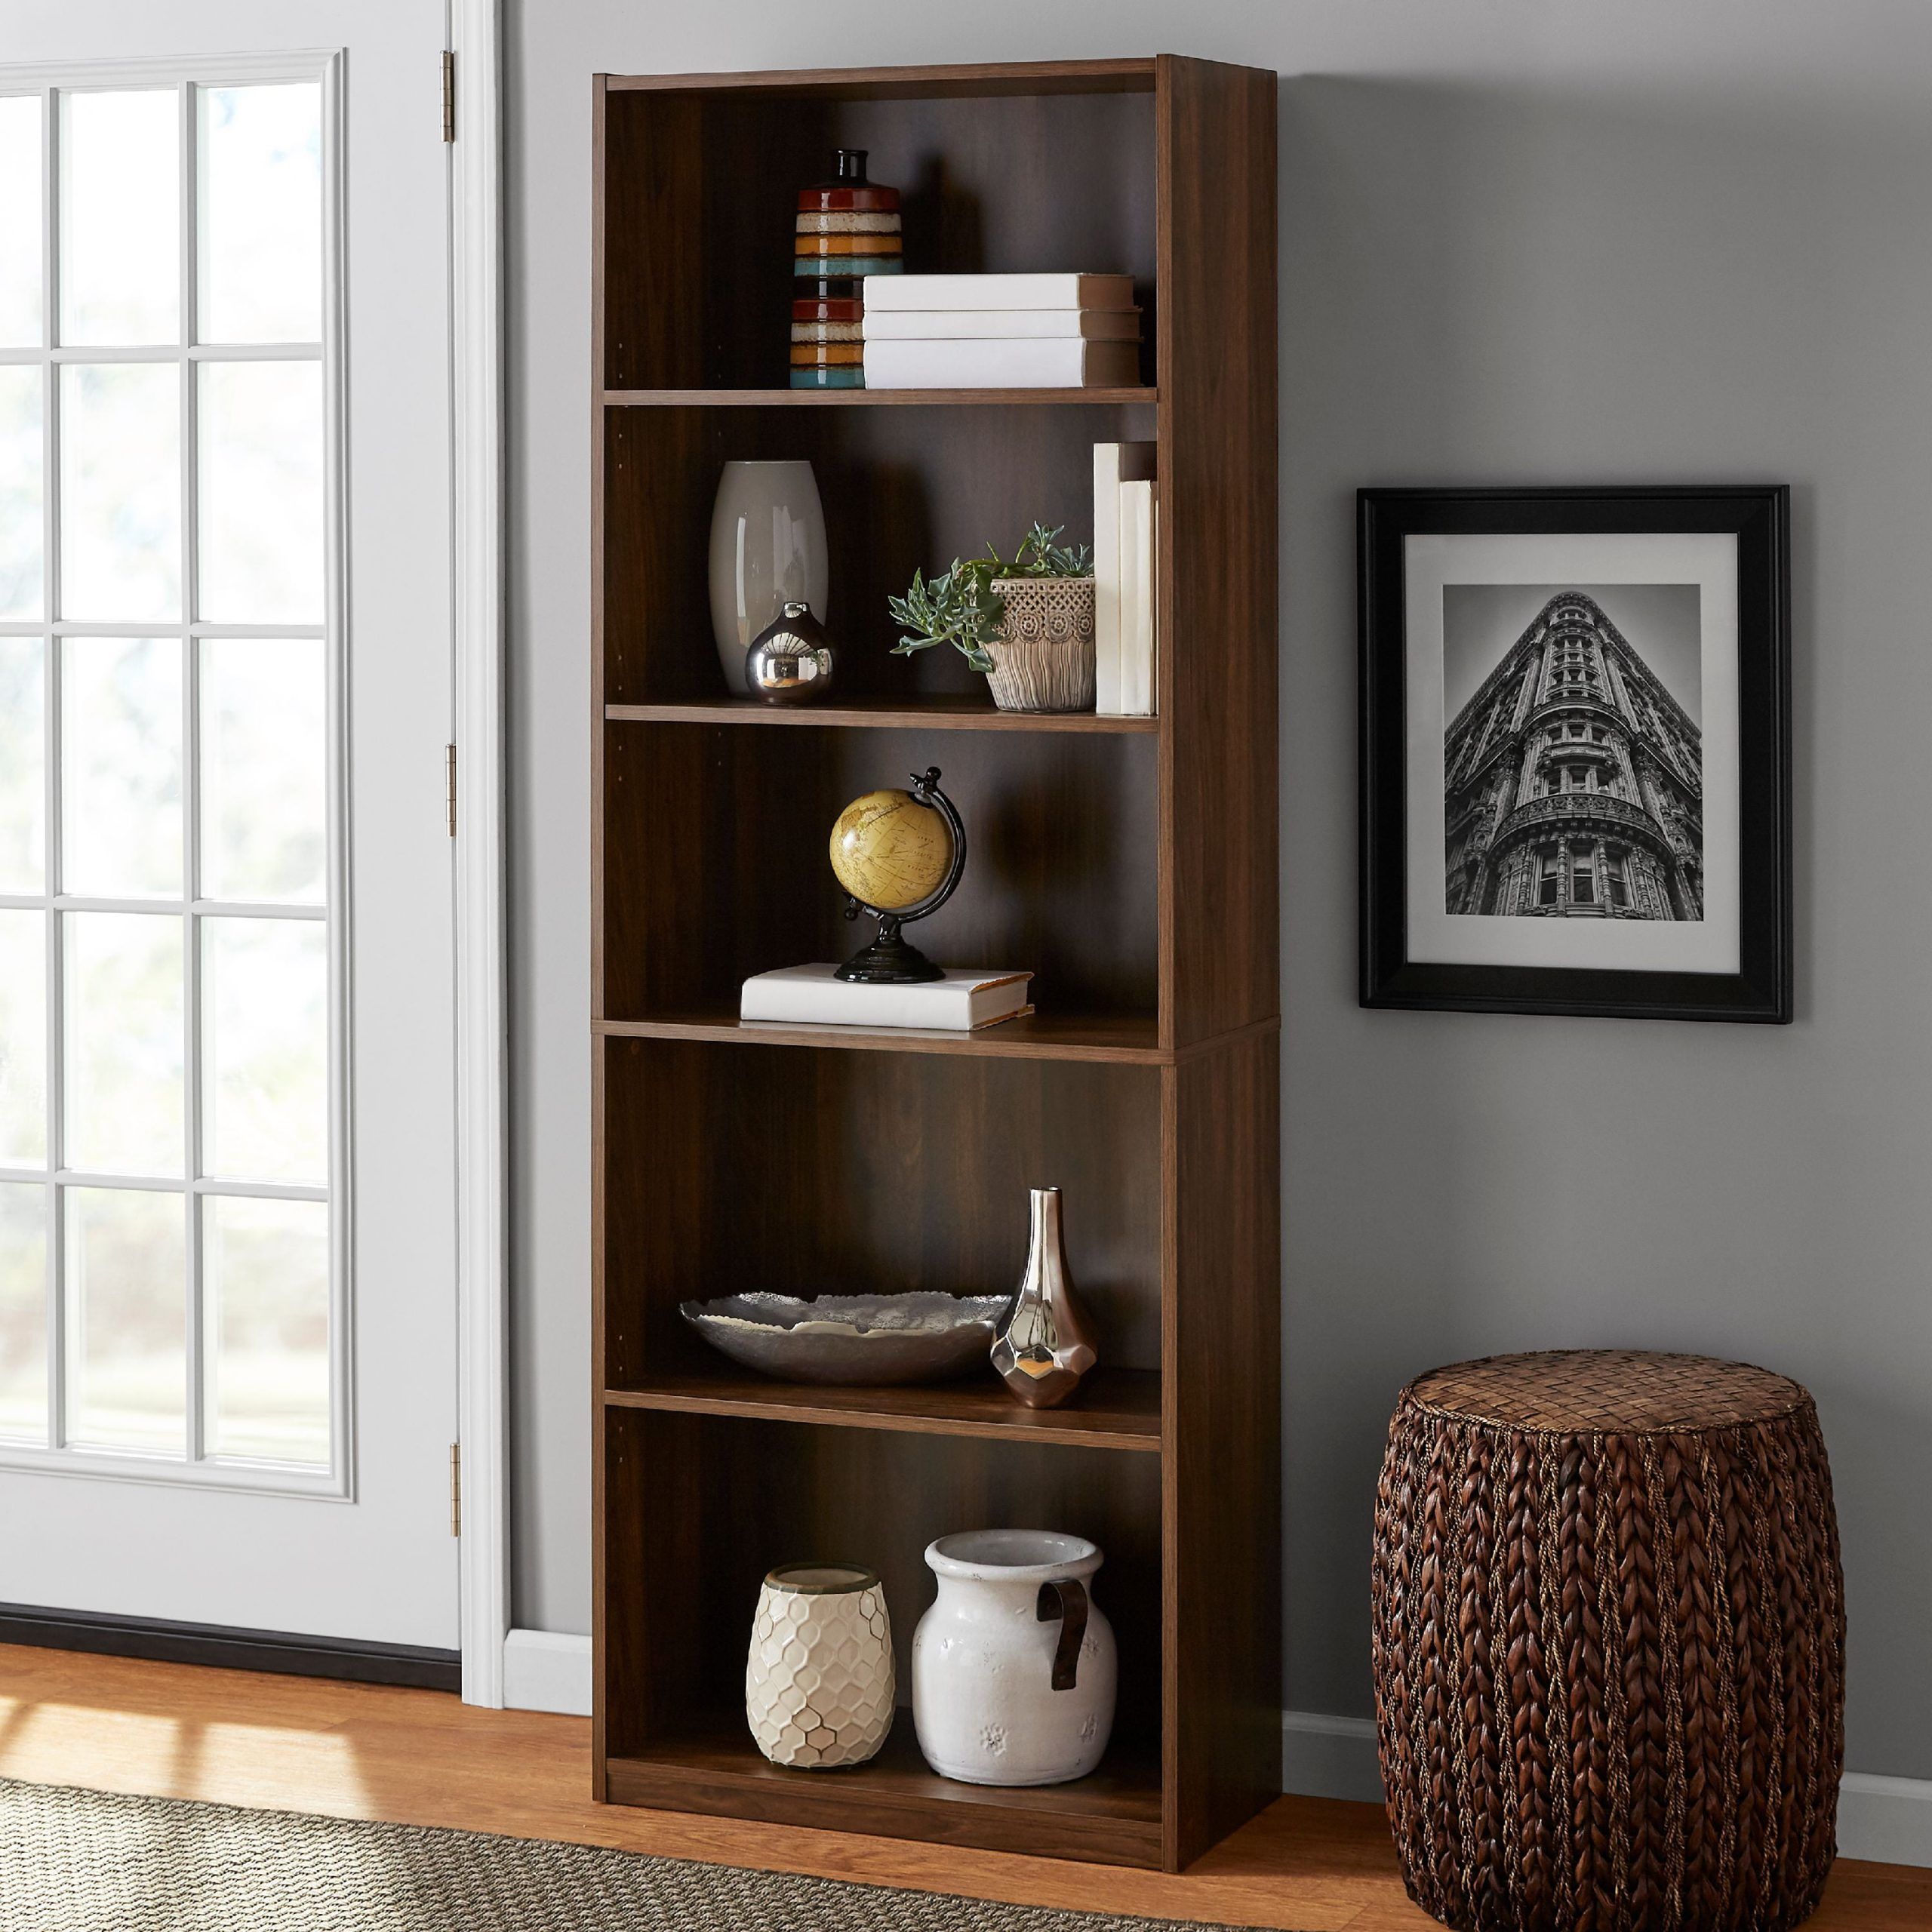 Mainstays 5 Shelf Bookcase With Adjustable Shelves, Canyon Walnut –  Walmart Intended For Bookcases With Five Shelves (View 4 of 15)